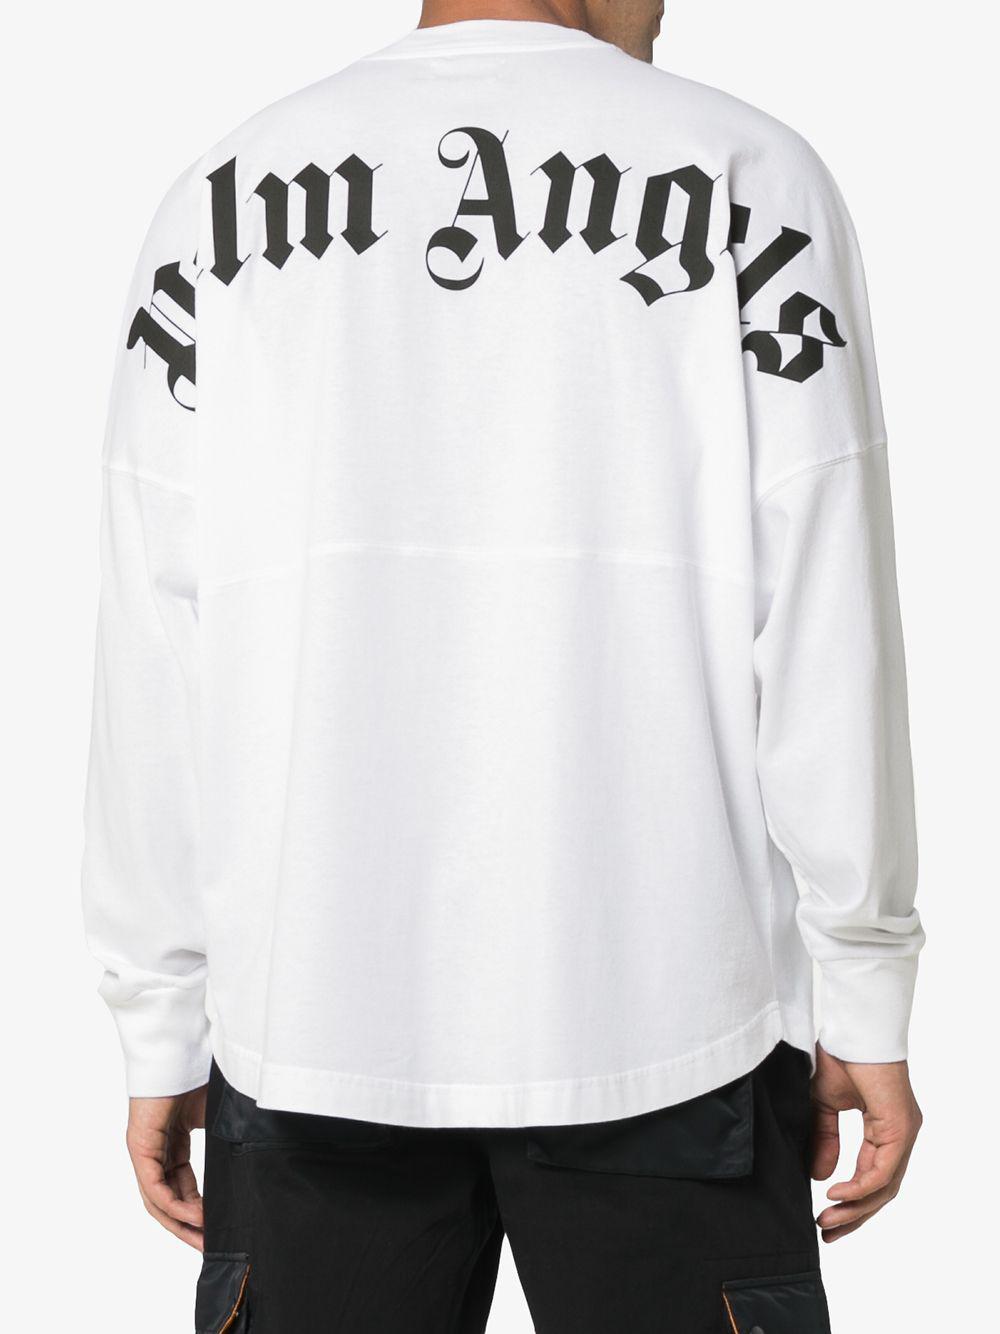 Palm Angels Logo Print Long Sleeve Cotton Top in White for Men - Lyst